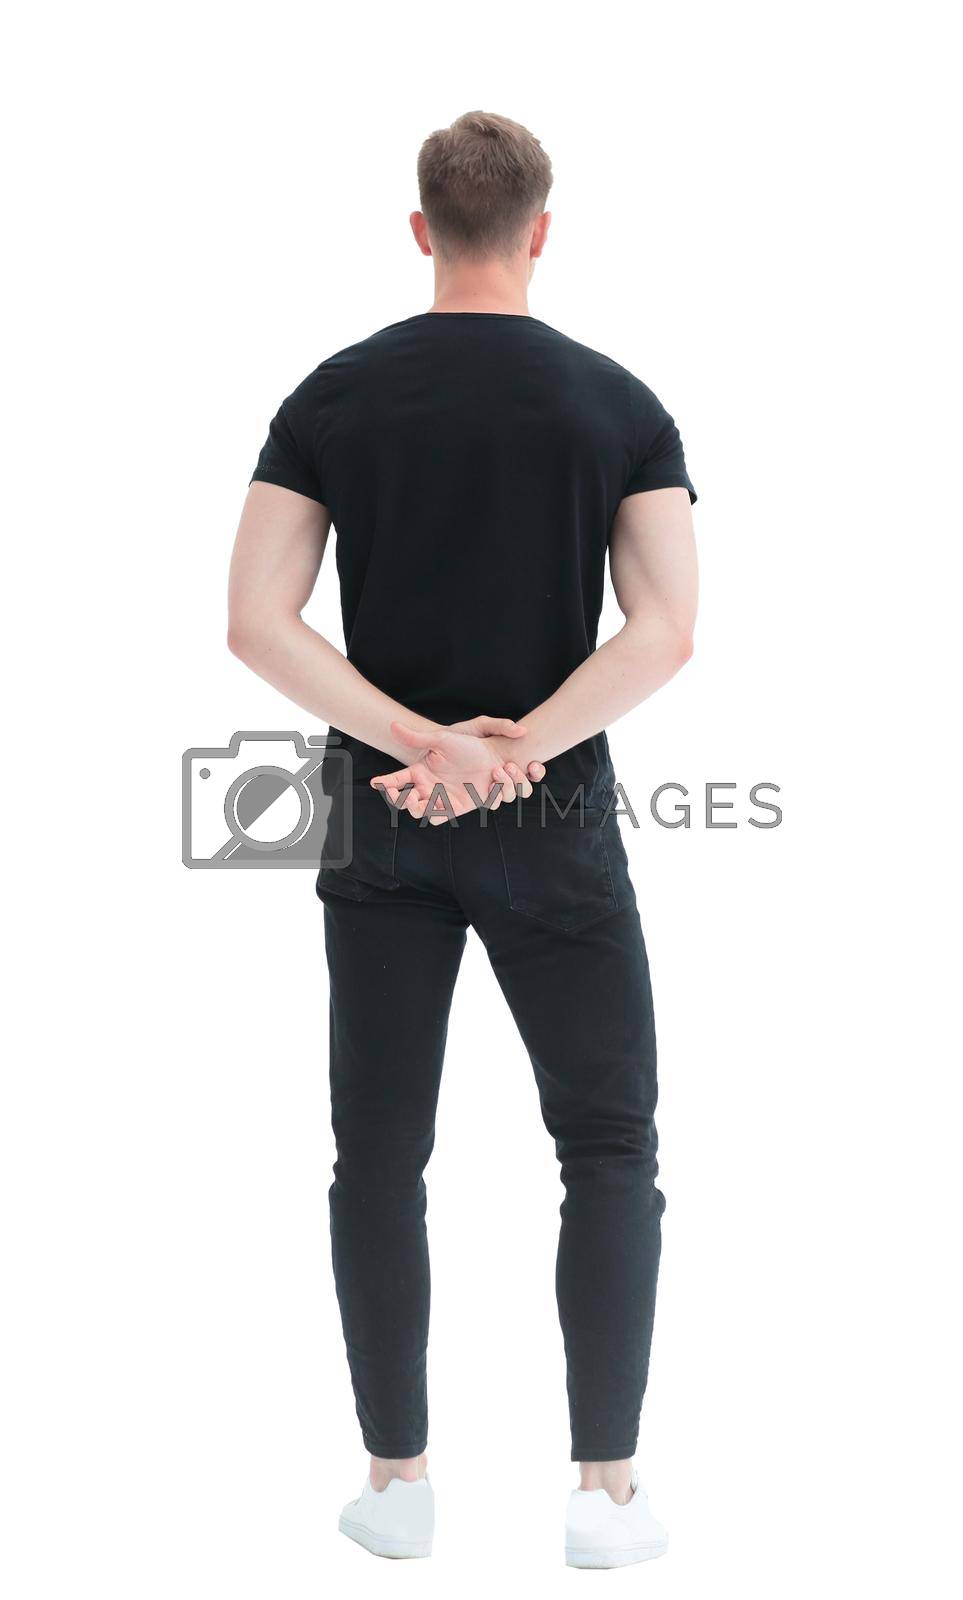 Royalty free image of rear view. confident young man looking ahead by asdf